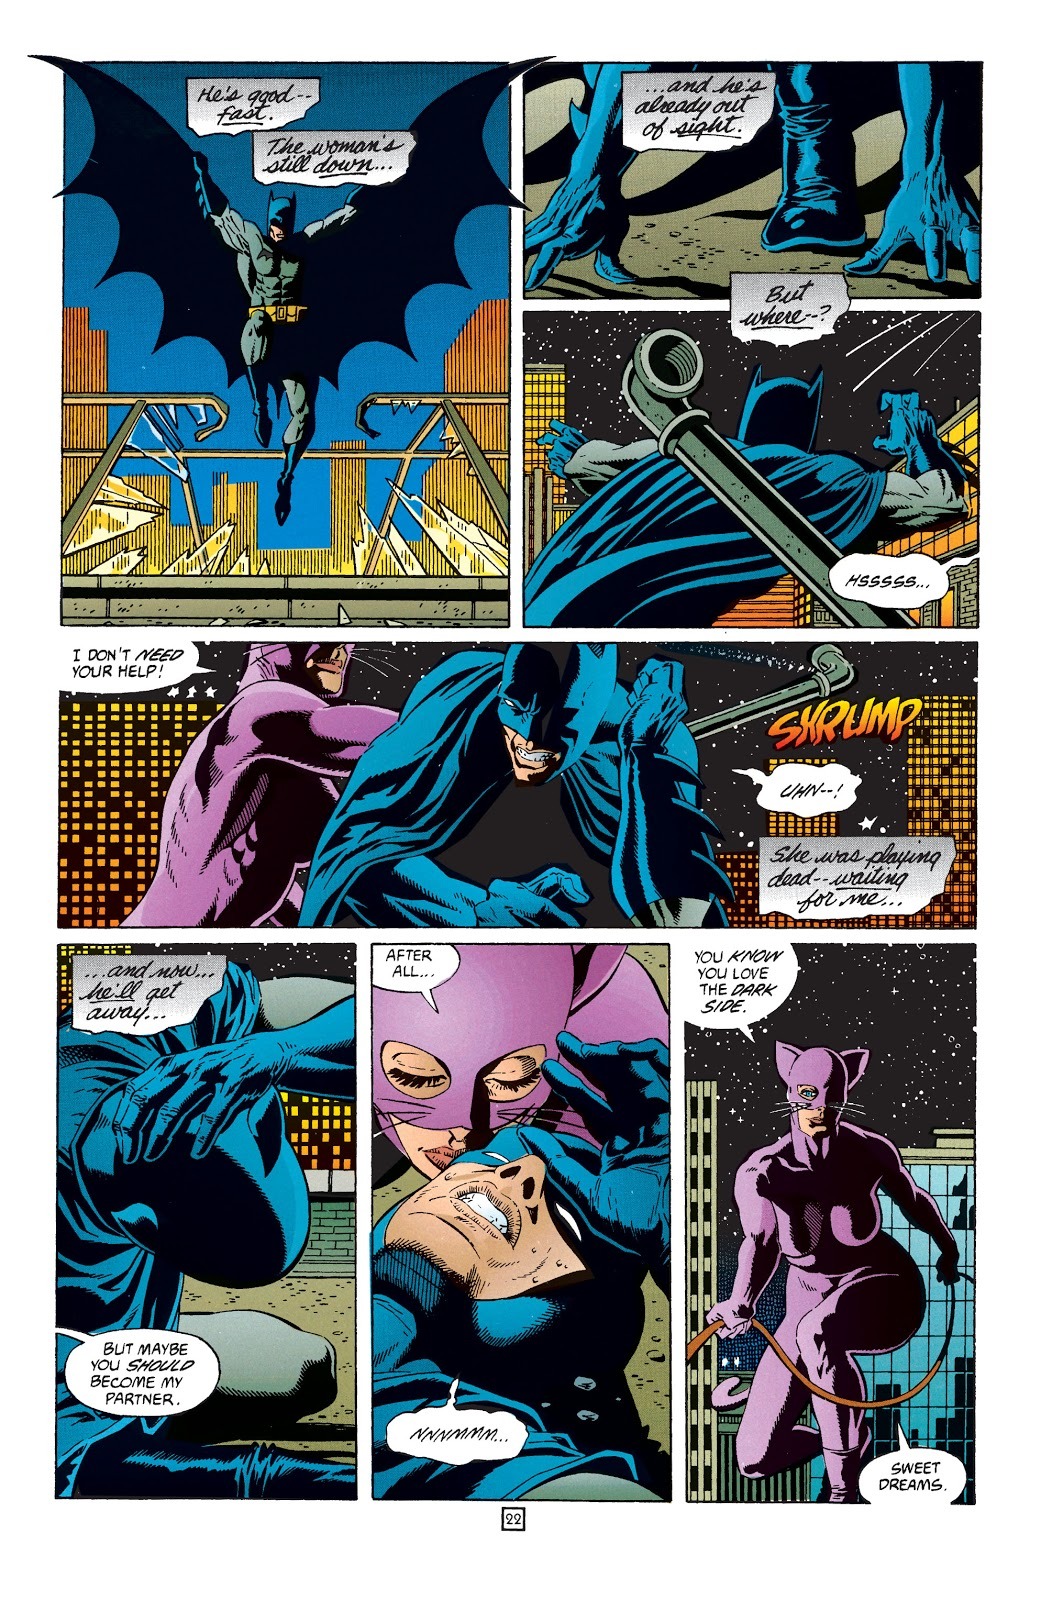 Batman: Legends of the Dark Knight, issue # 13 (December 1990).
An early encounter between Bat and Cat that is pretty much par for the course.